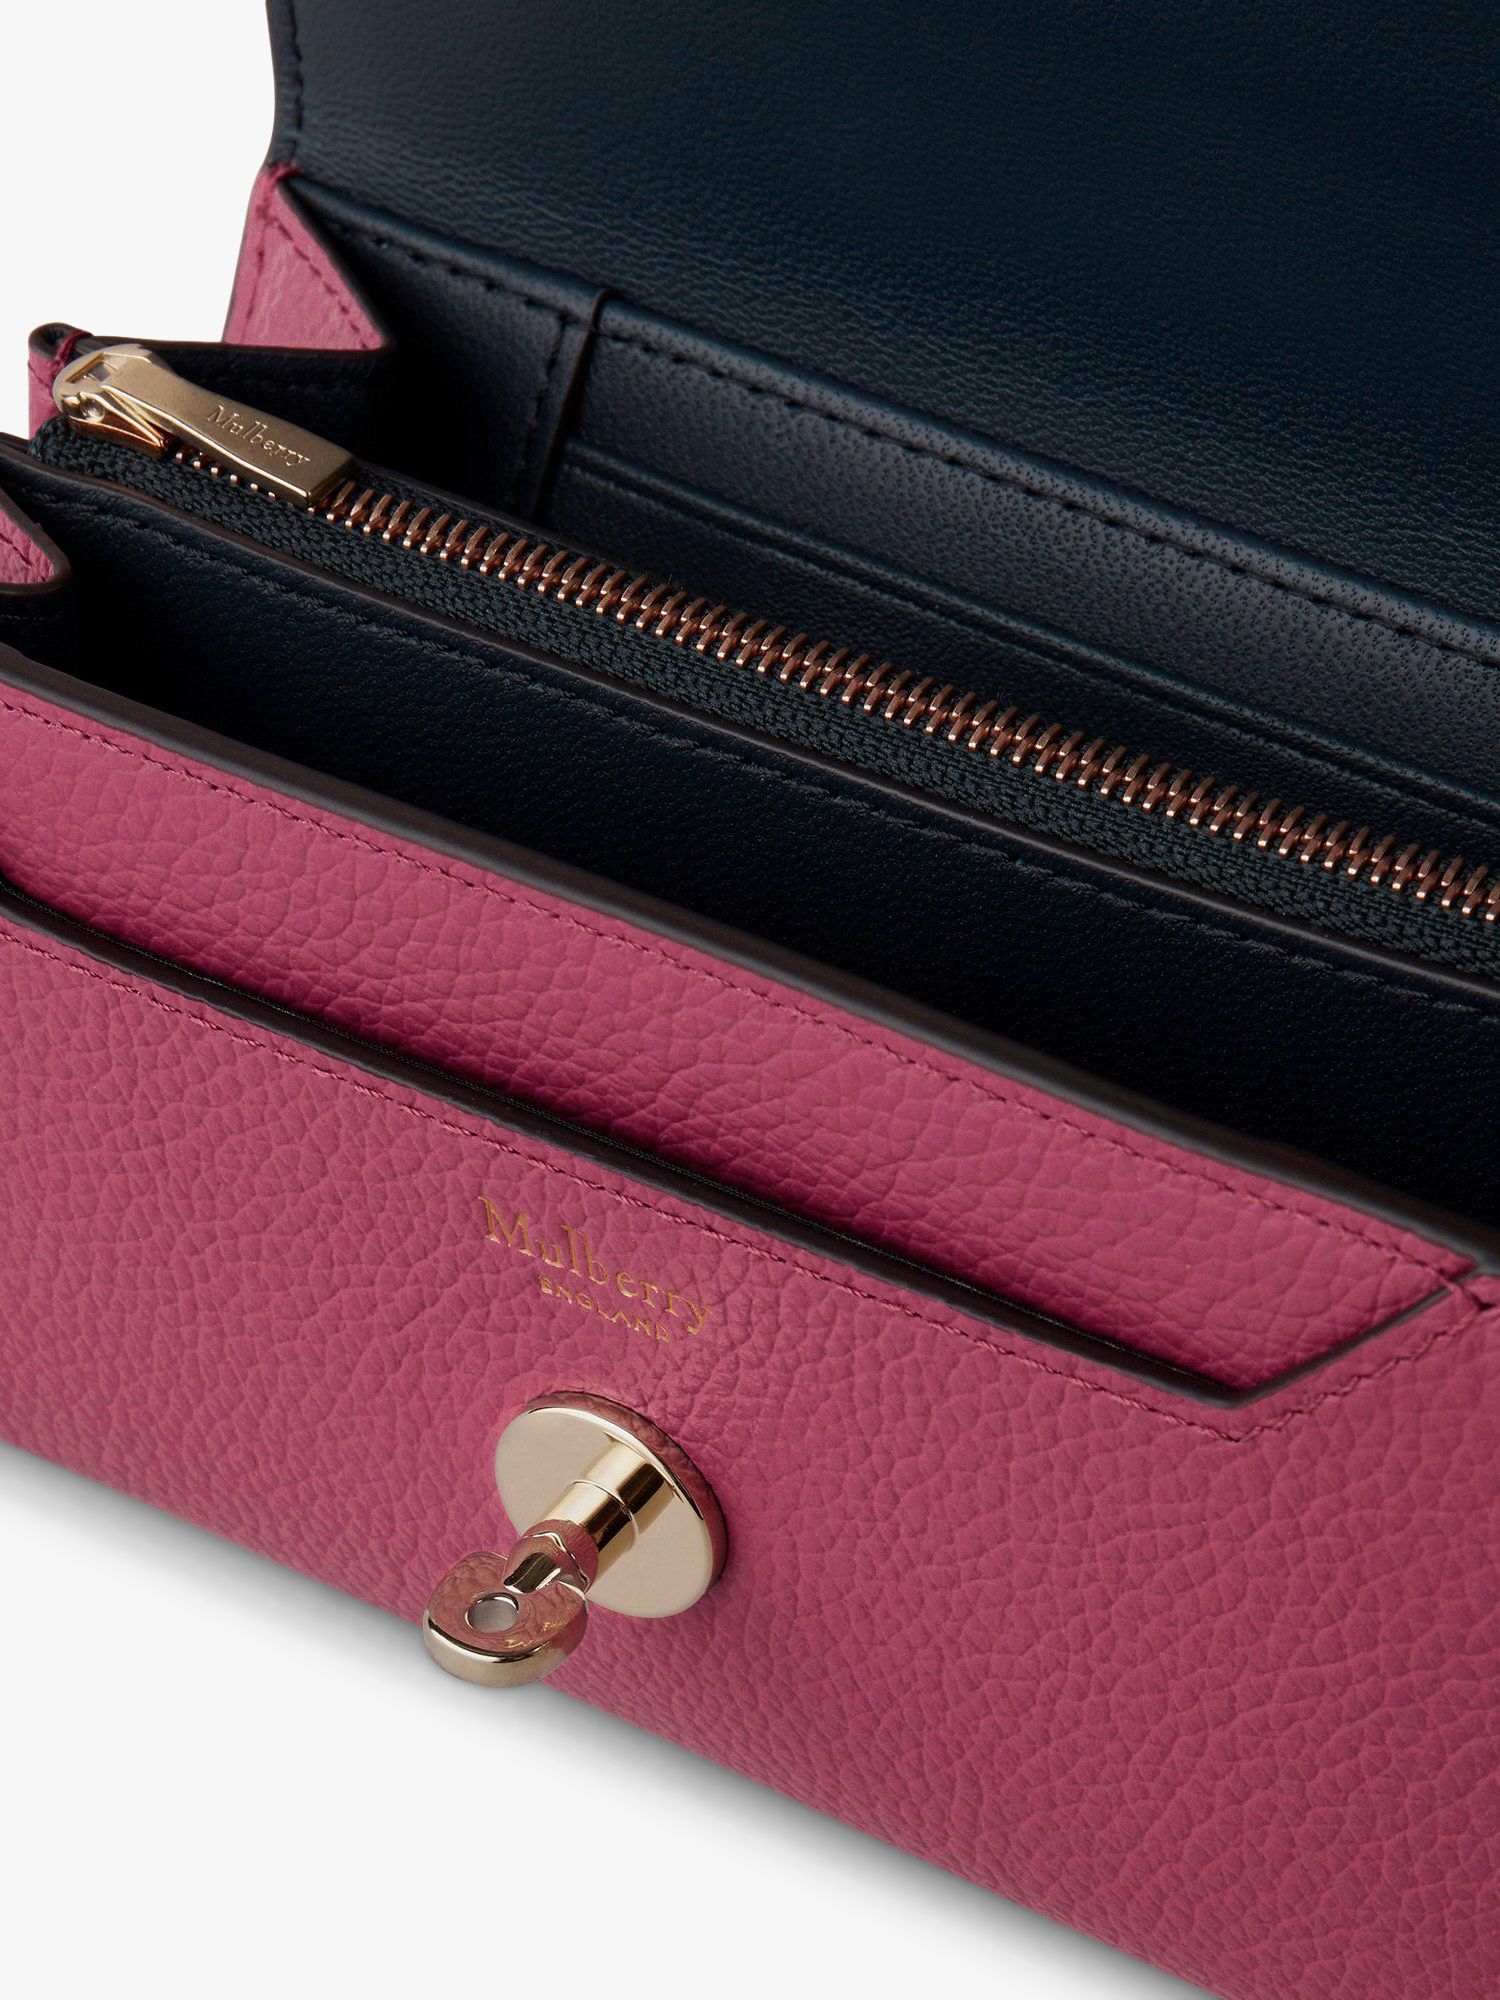 Buy Mulberry Small Classic Grain Leather Medium Darley Wallet Online at johnlewis.com